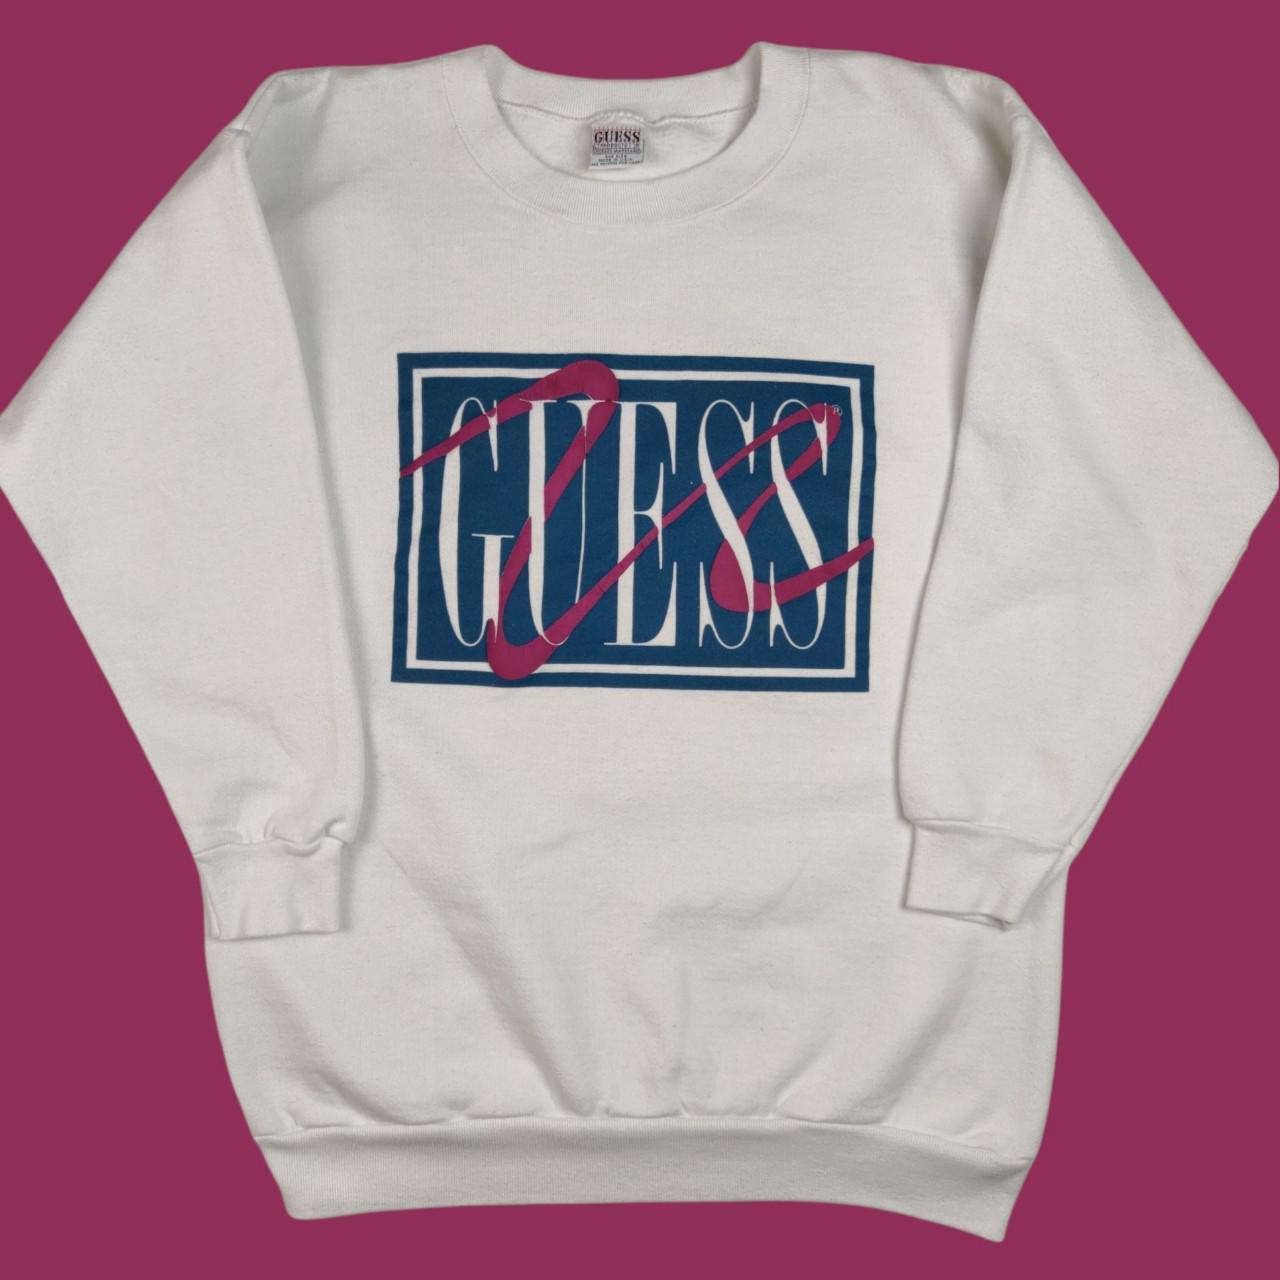 Guess Men's White and Pink Sweatshirt